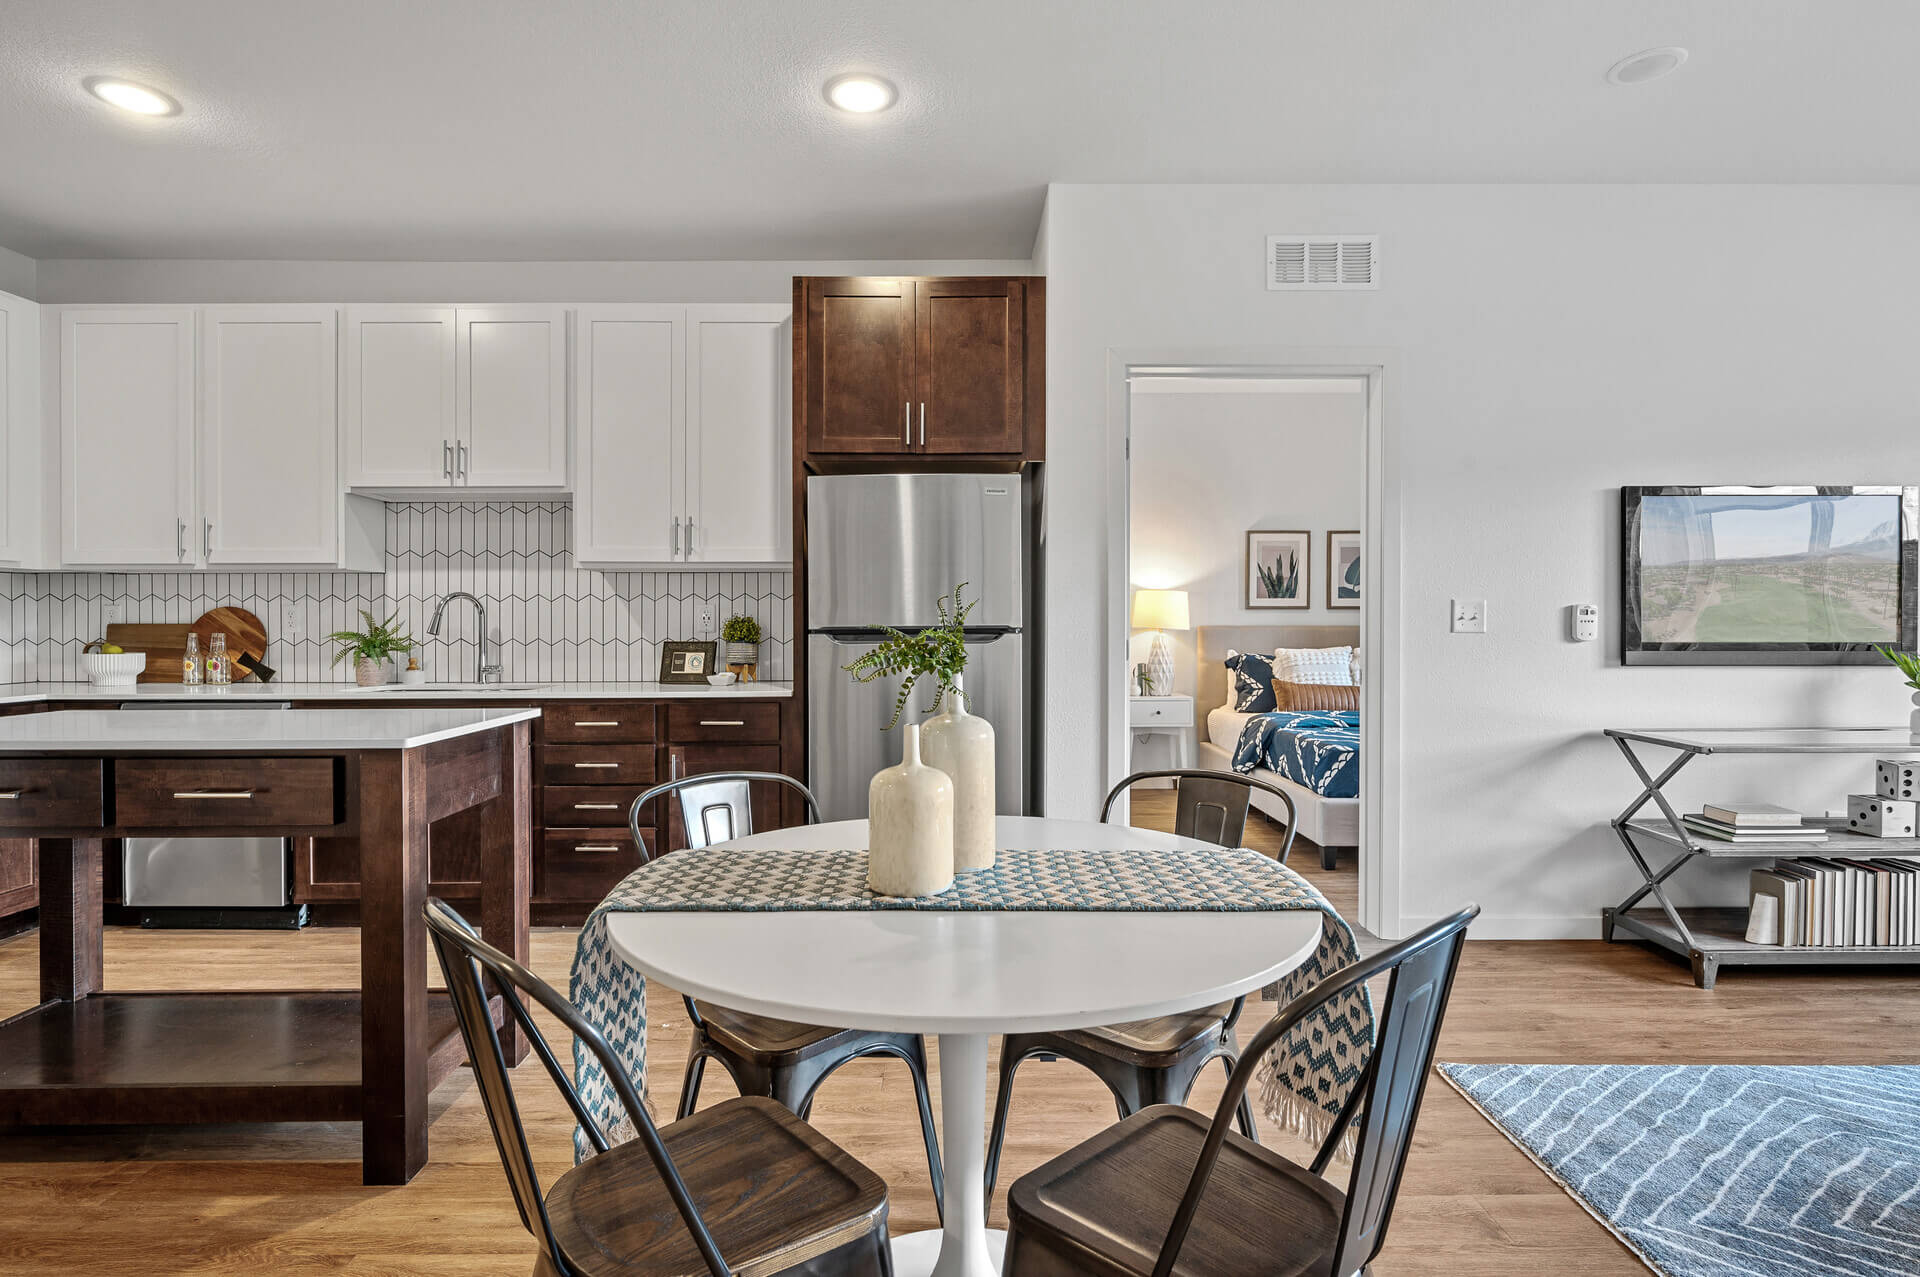 Modern kitchen with white cabinetry, stainless steel appliances, and a contrasting dark wood island, leading to a dining area with a round white table, patterned chairs, and a view into a cozy bedroom with visible decor.